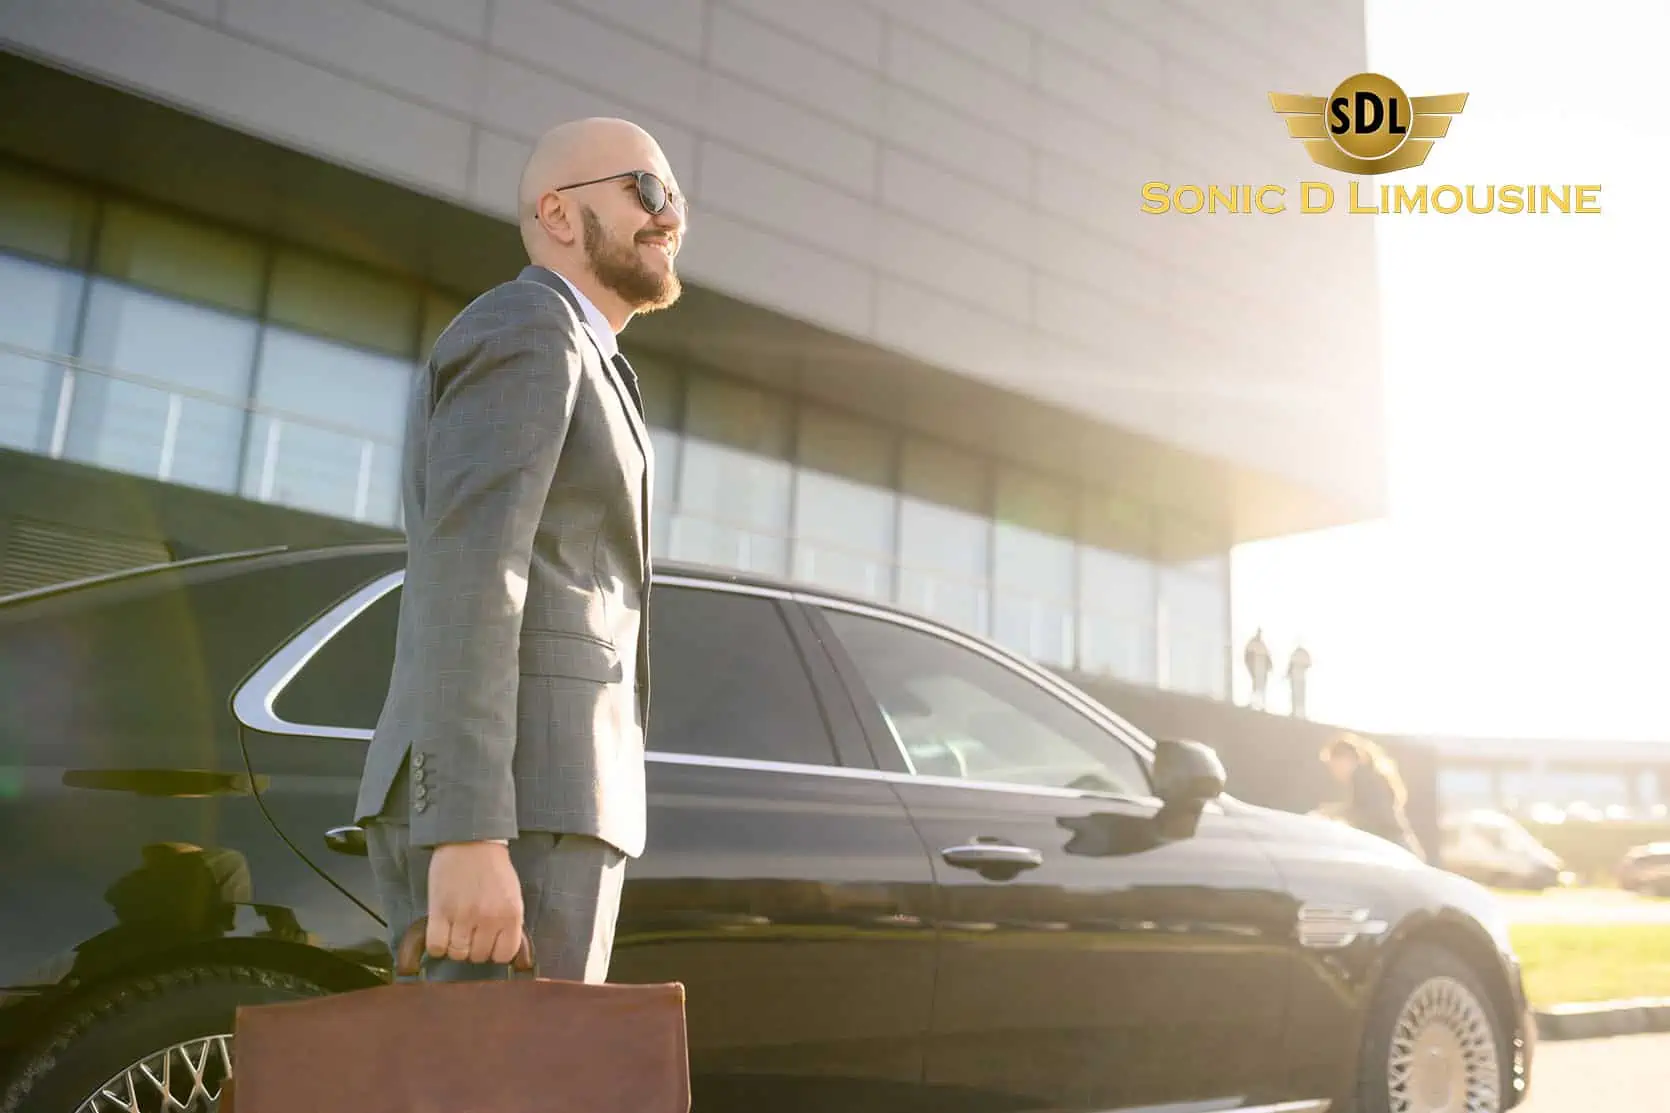 Sonic D Limousine A man with a briefcase is standing next to a mercedes benz.